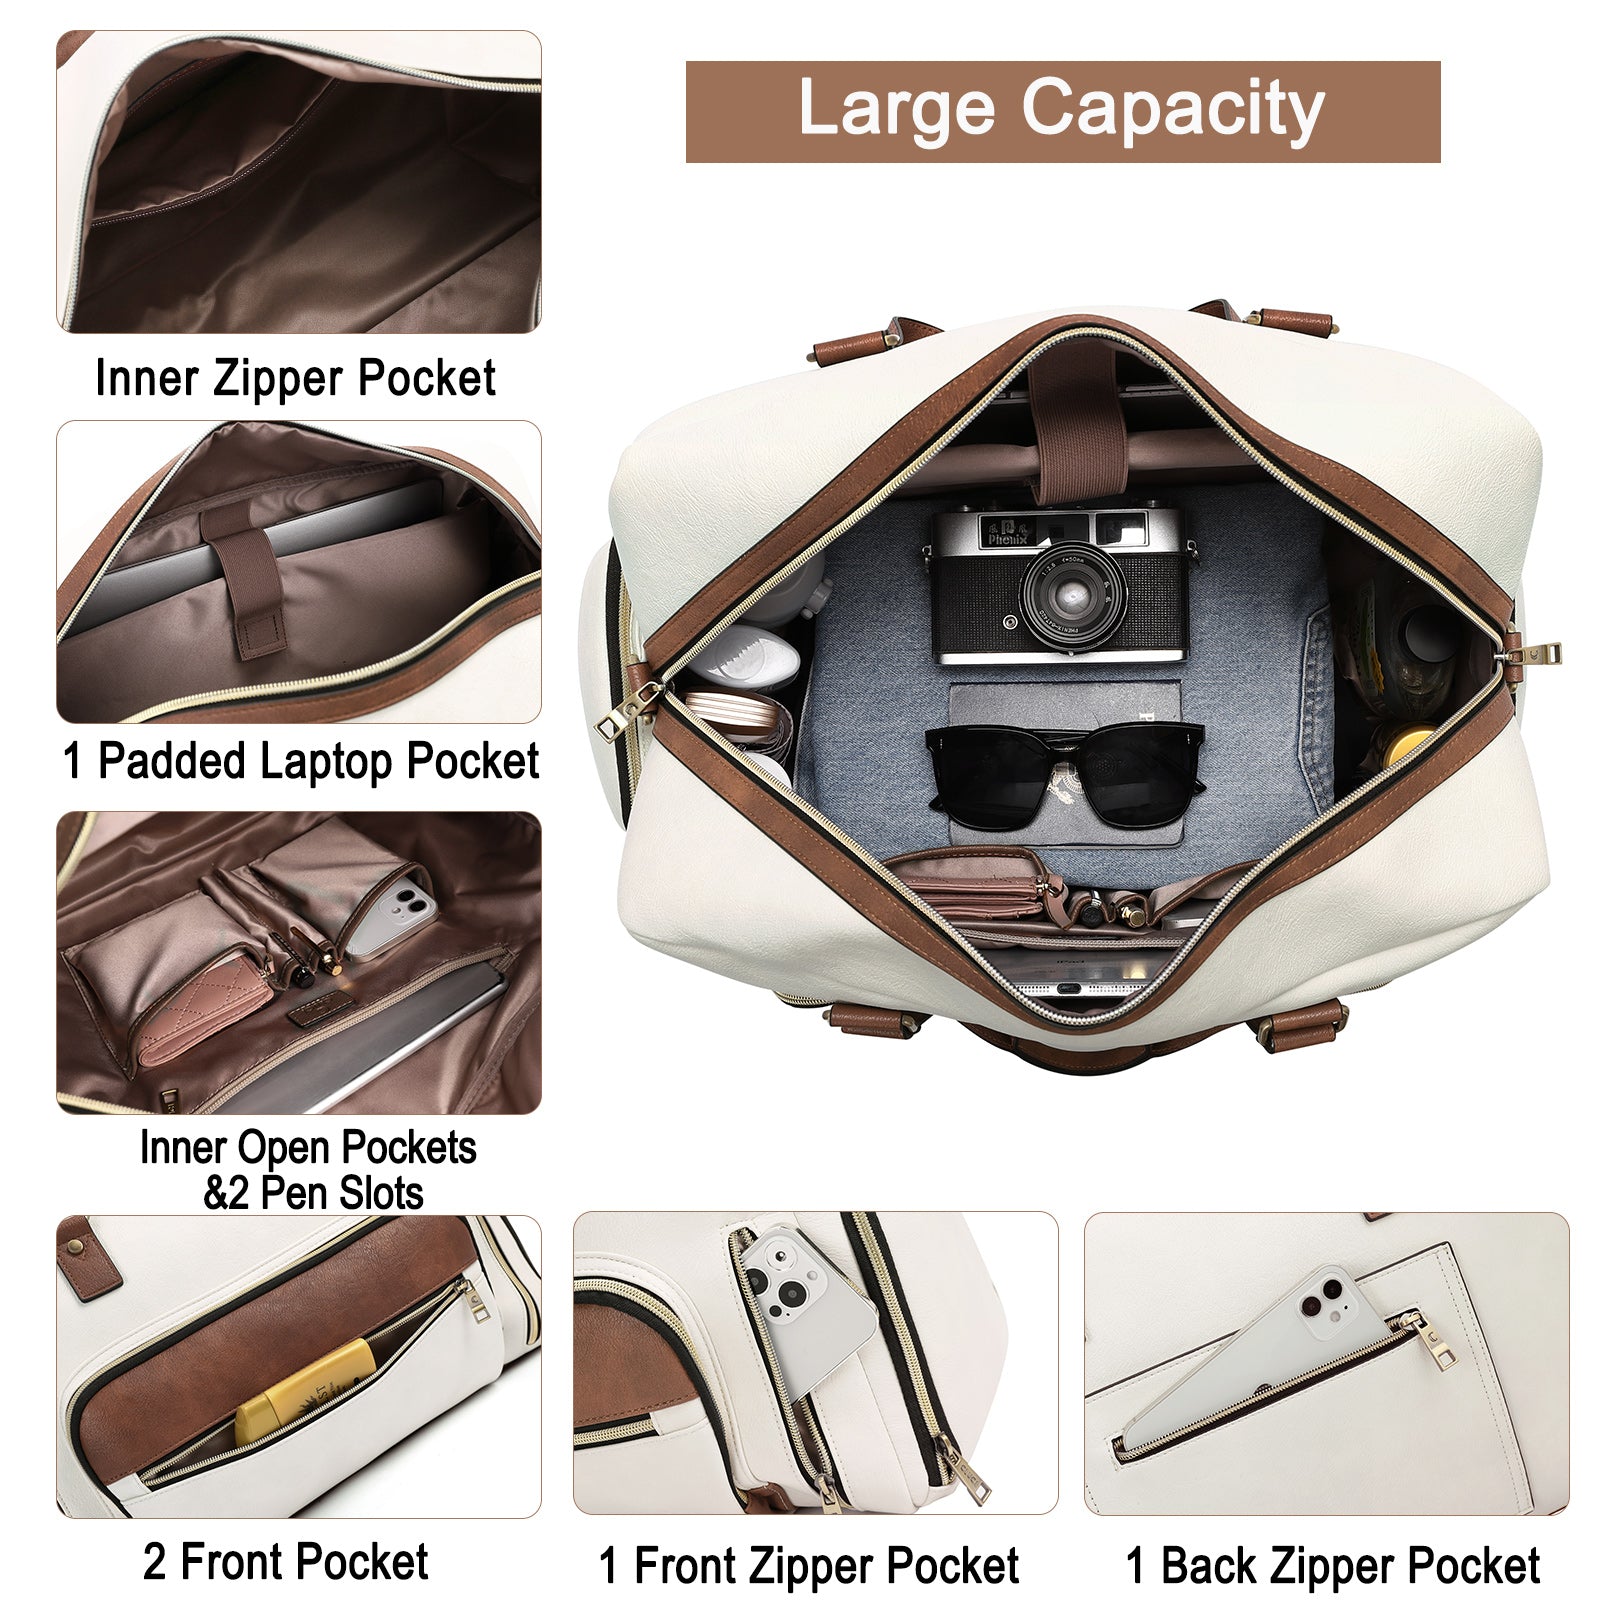 Leather Duffel Bag With Shoe Compartment Men Weekender 